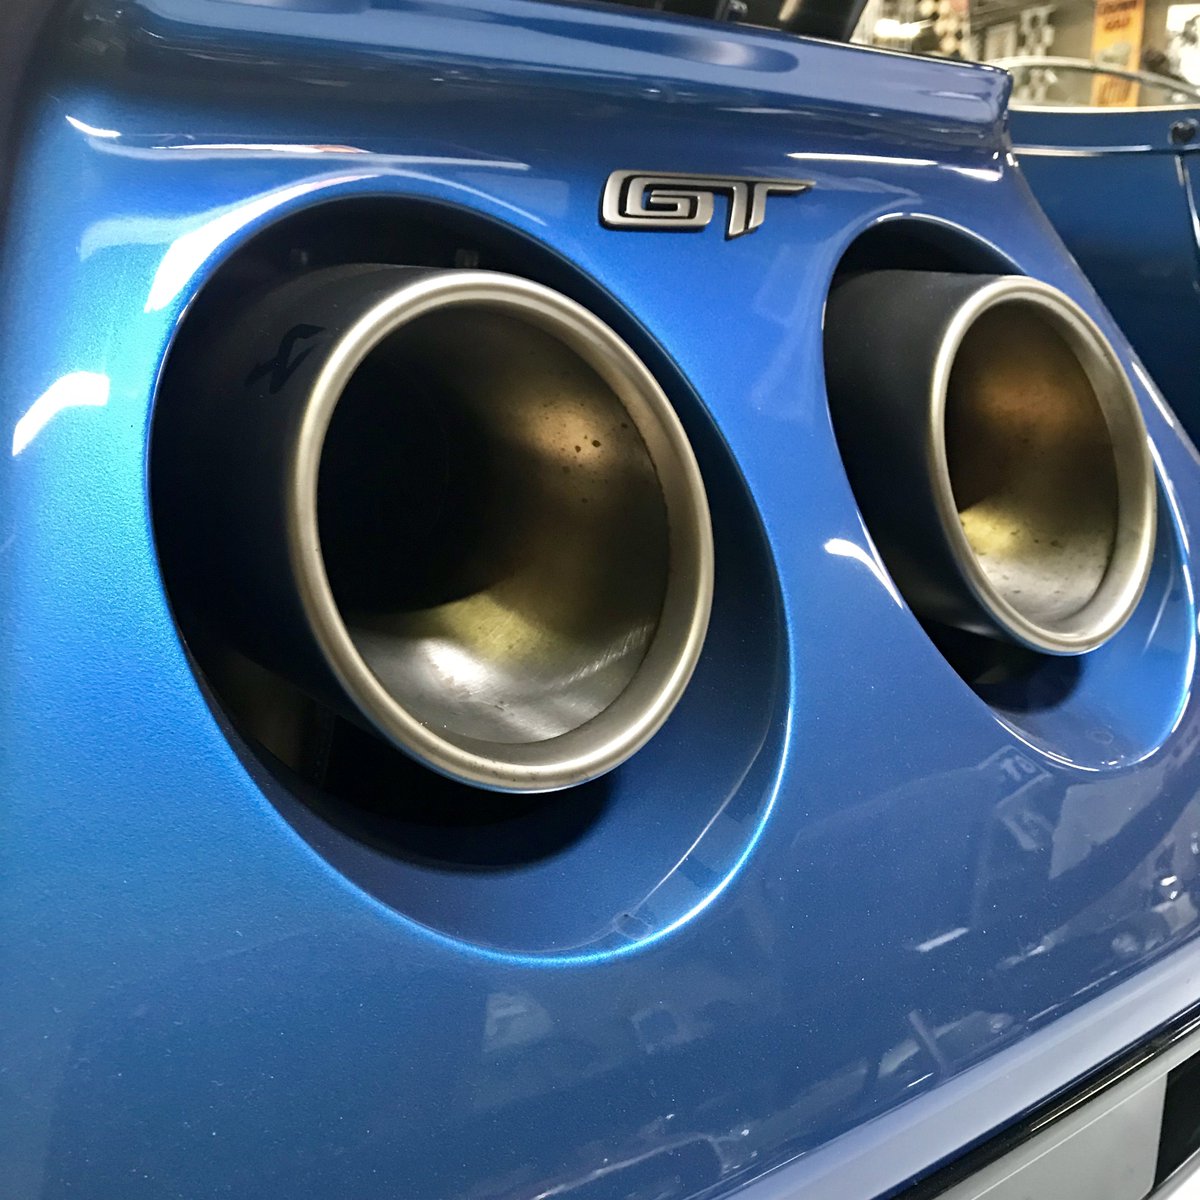 Titanium exhaust on a 2017 Ford GT.  #titaniumexhaust #cars #fordgt #ford #sportscar #cars #exoticcars #supercar #supercars #supercarlifestyle #dreamcar #luxurycarlife #supercarclub #supercarsdaily #carspushingthelimits #supercardriver #carsociety #superexoticcars #gt40 #fordgt40